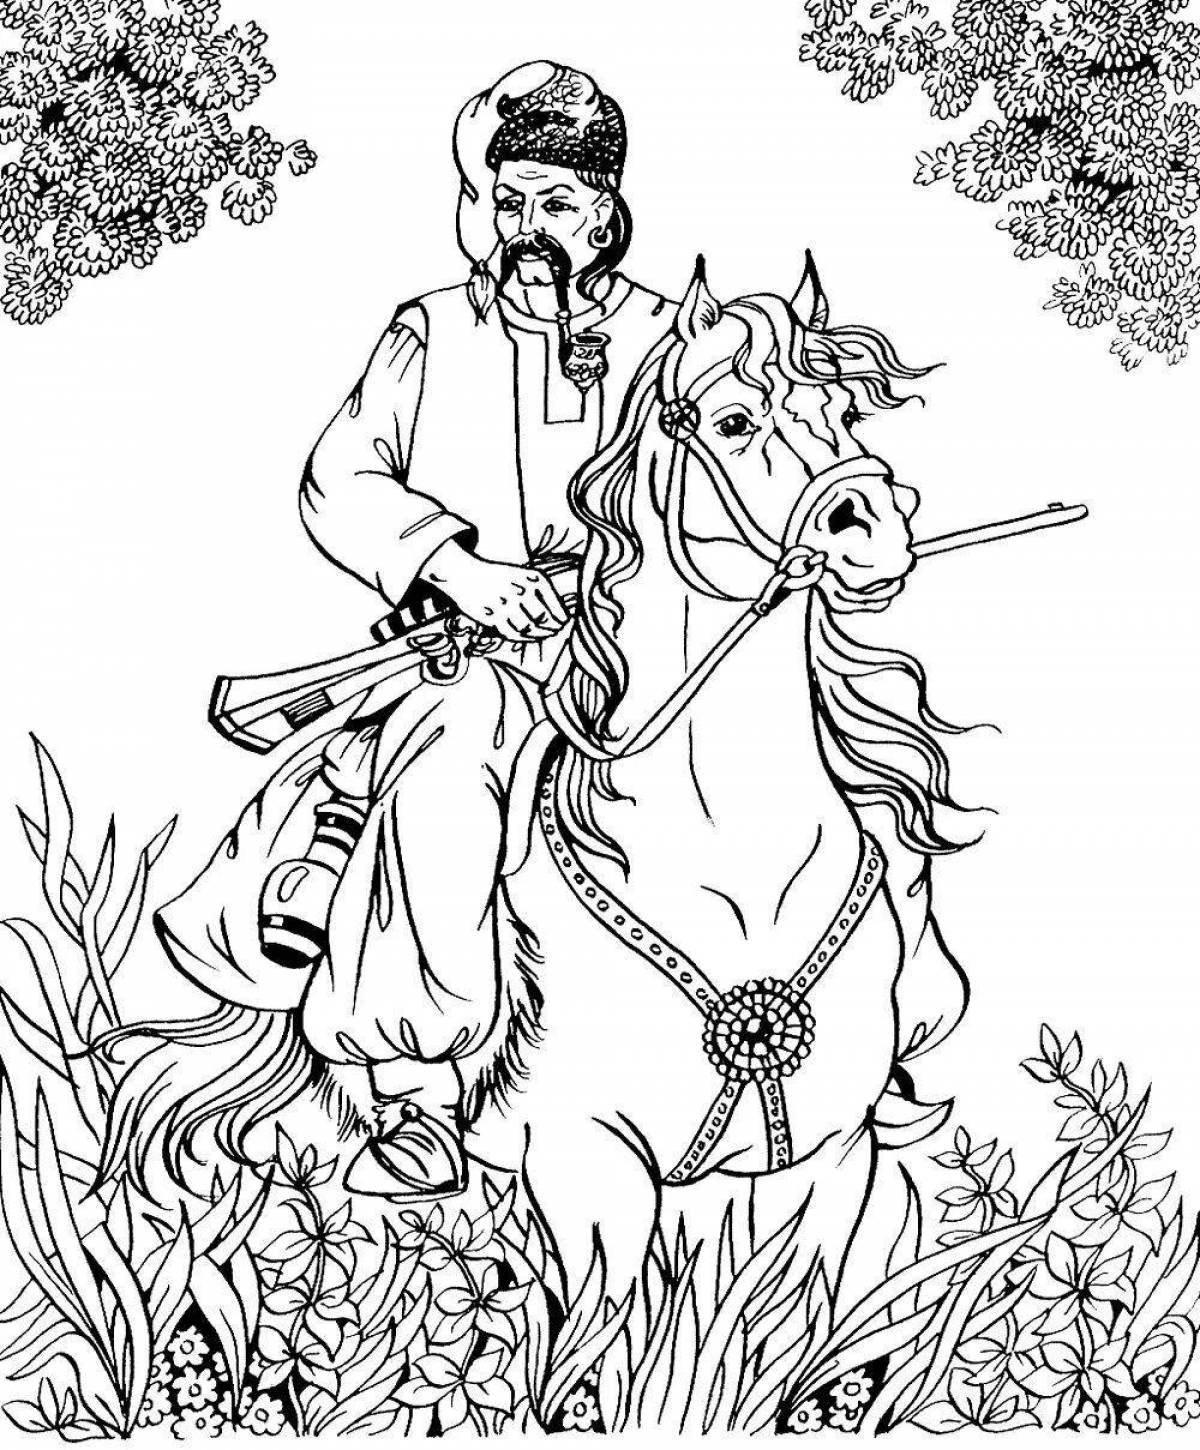 Colouring awesome Cossack costume